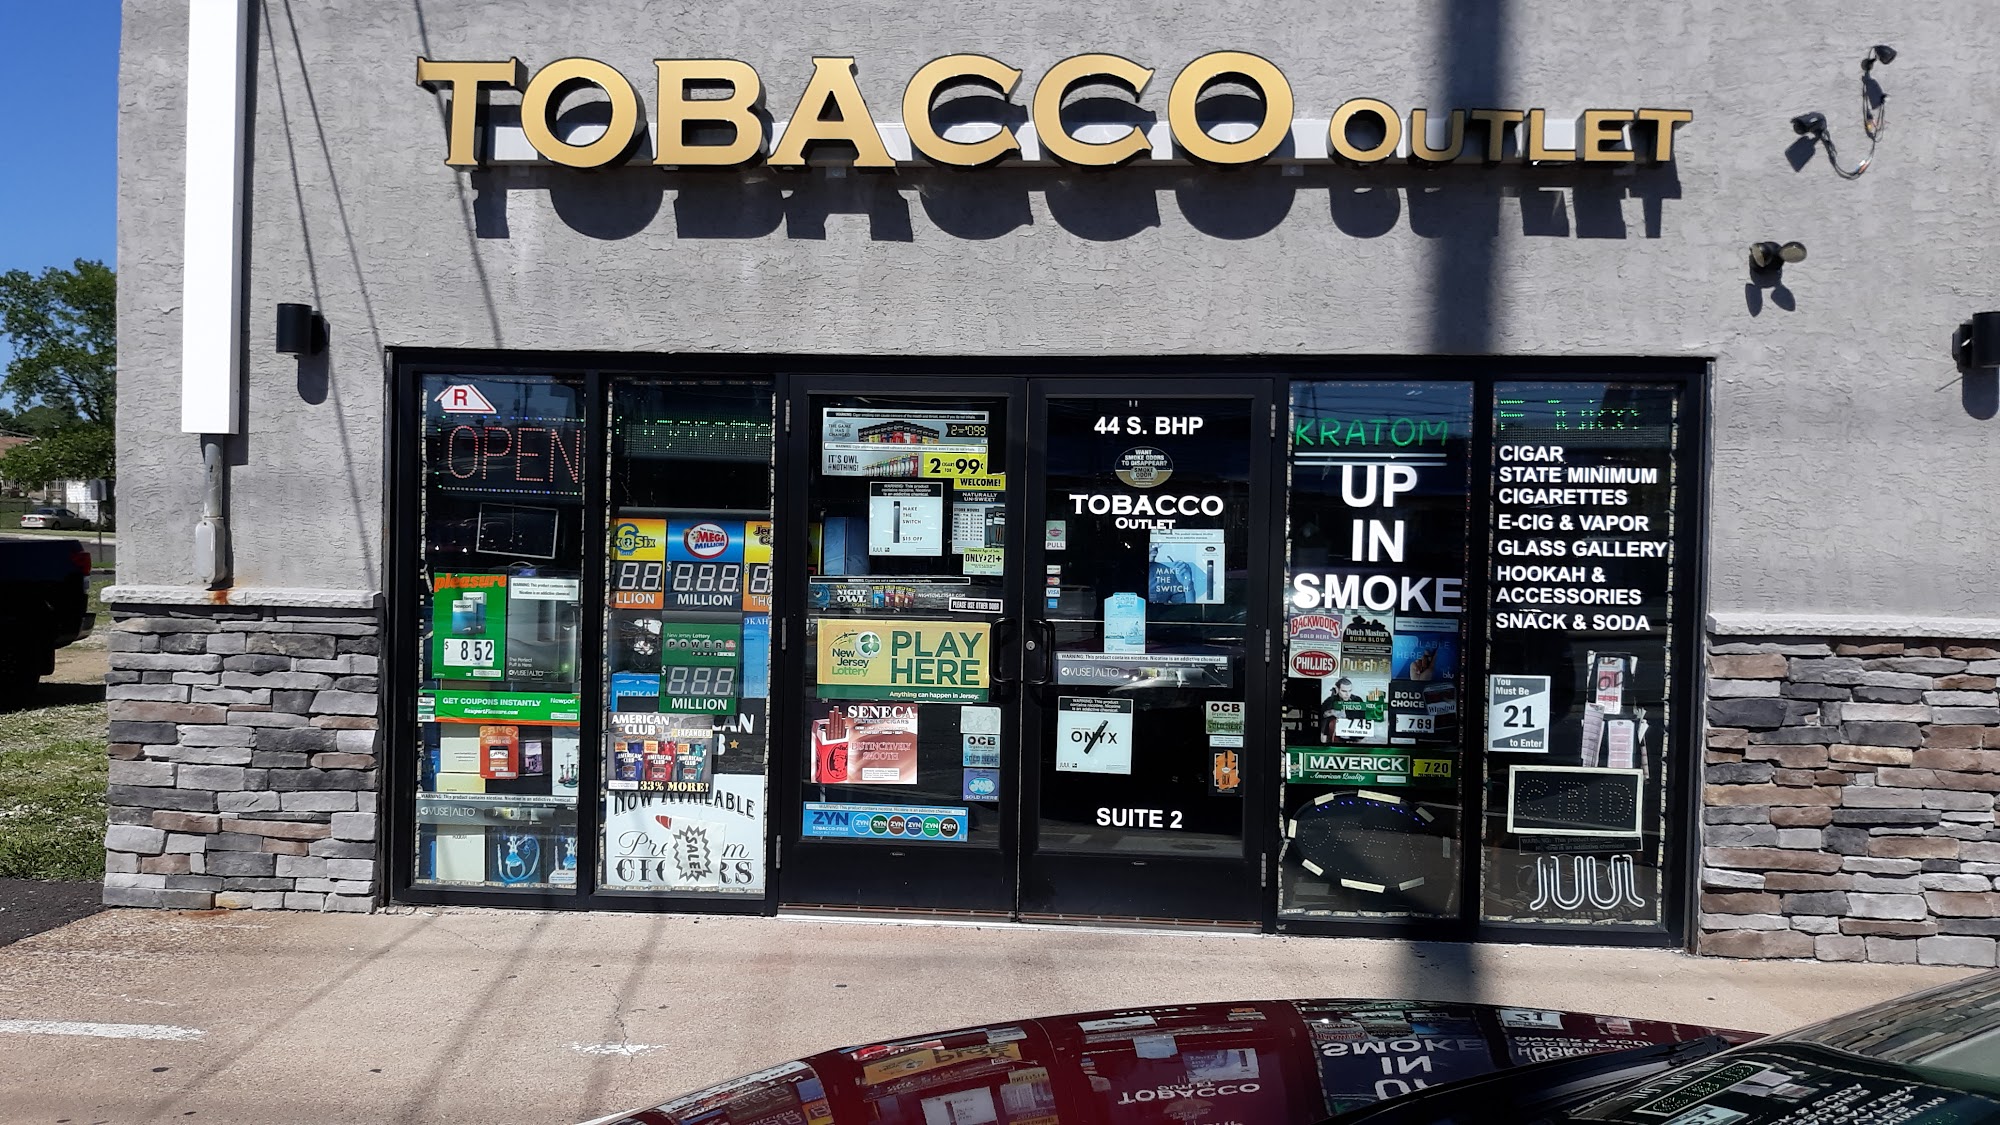 Tobacco Outlet UP IN SMOKE